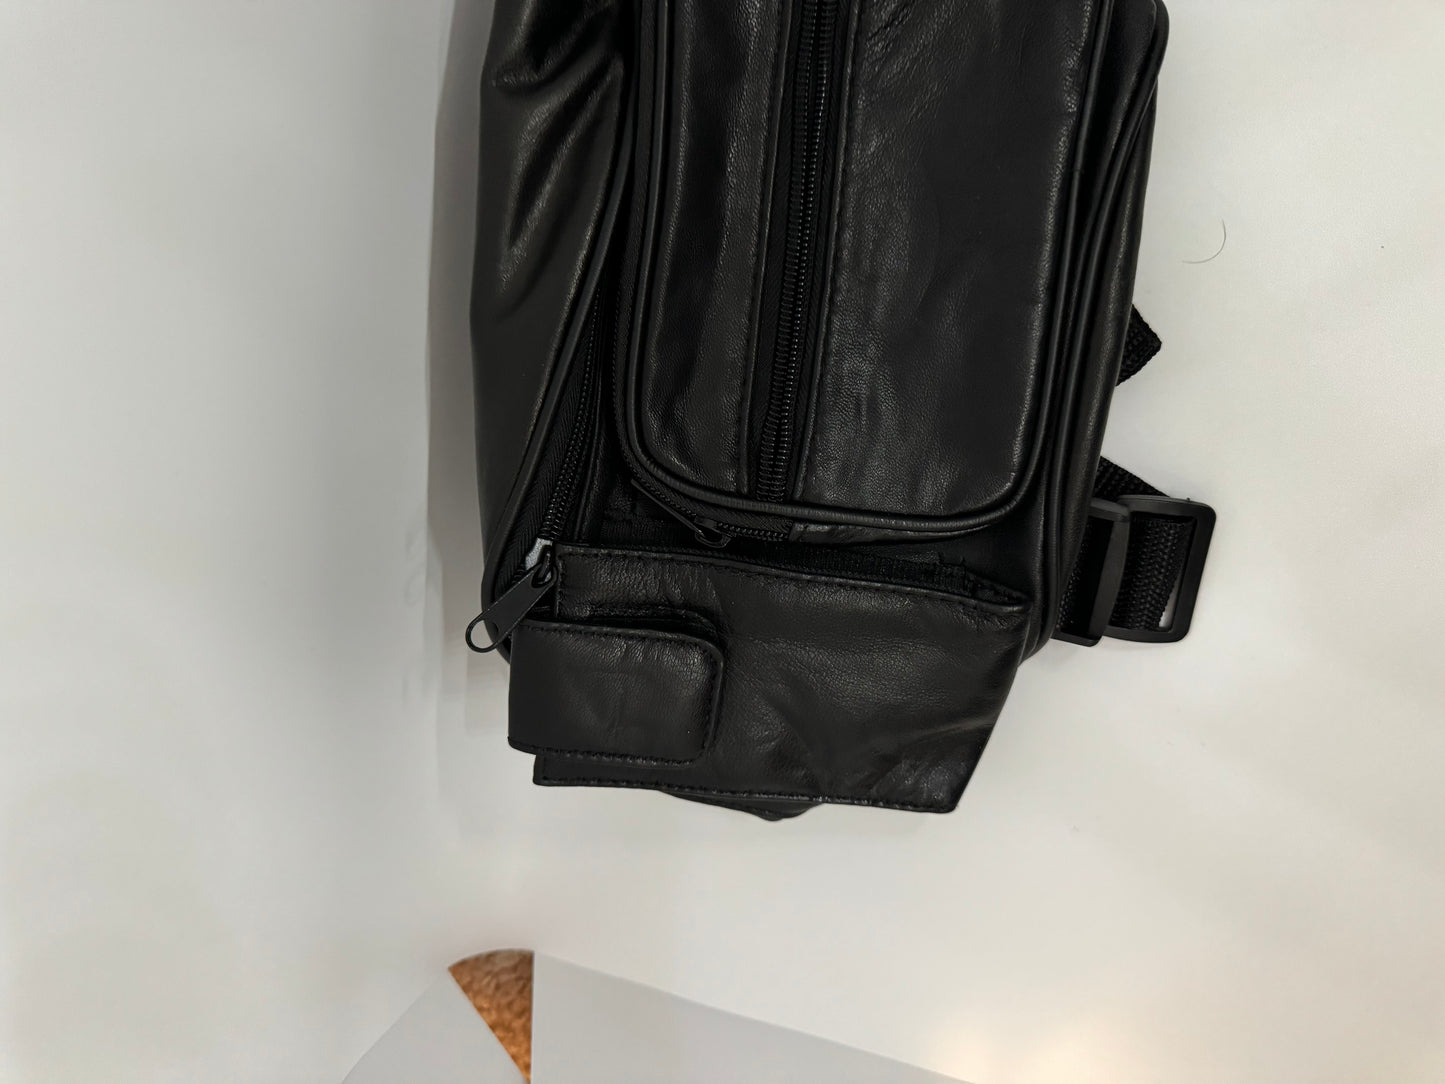 The picture shows a black leather bag. The bag appears to be a small sling bag or waist pouch. It has multiple zippers and pockets. There is a zipper at the top and a smaller zipper in the front. The bag also has a black strap with a plastic buckle, which is likely used to secure it around the waist or across the body. The bag is placed on a white surface.